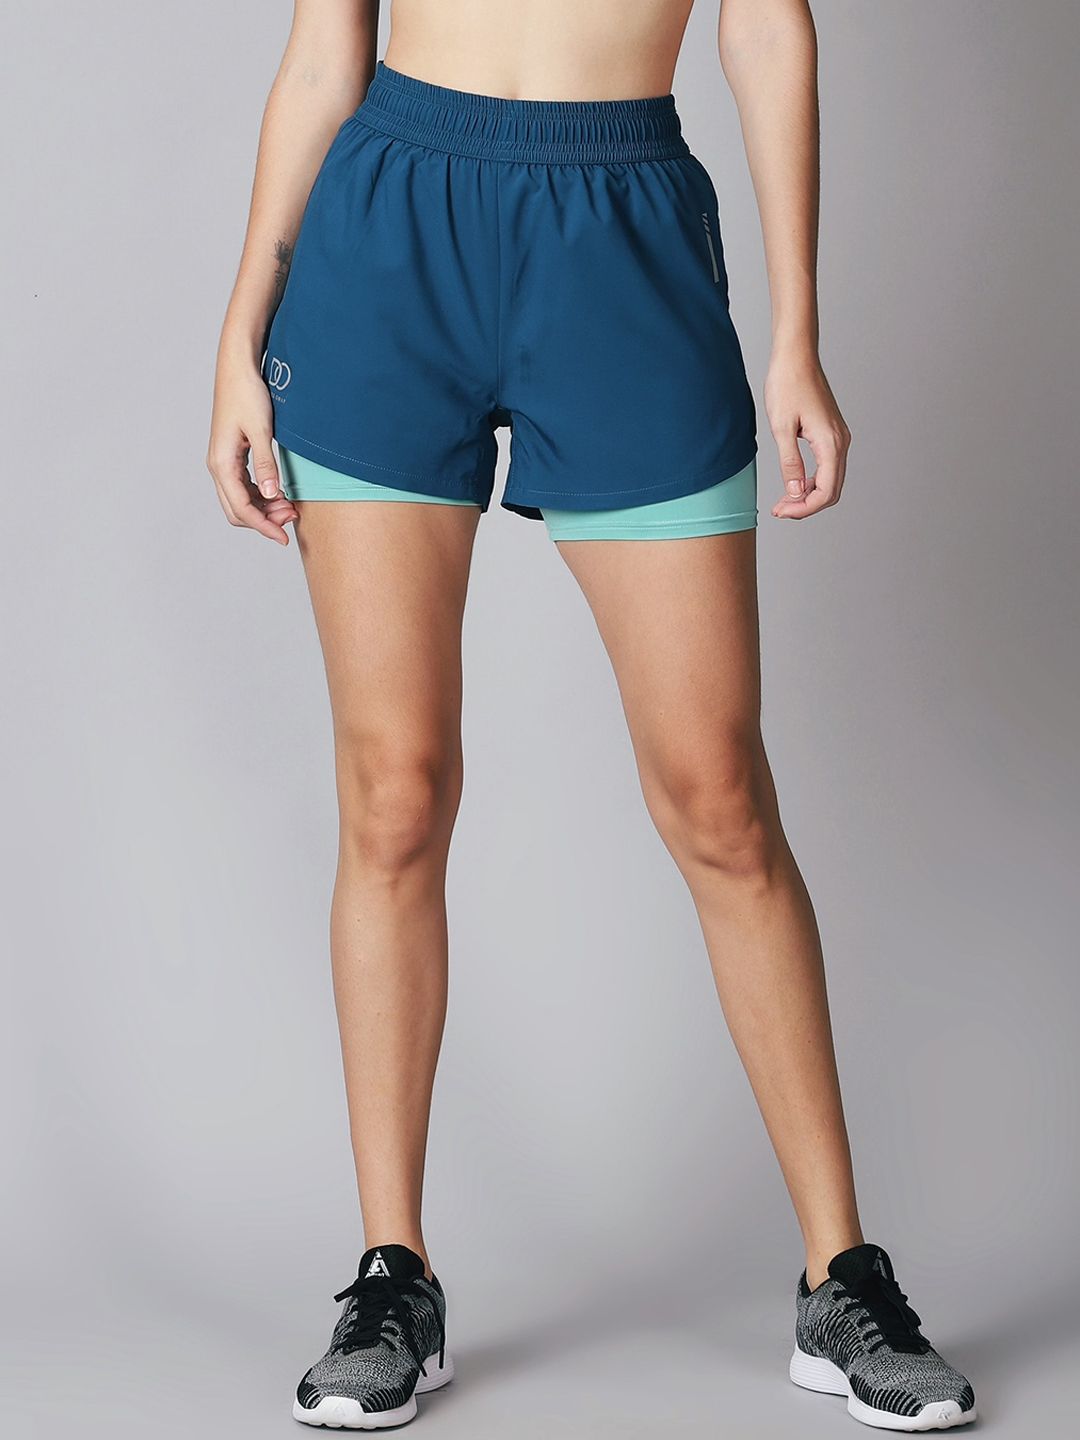 The Short Store Women Teal Blue High-Rise Running Sports Shorts Price in India